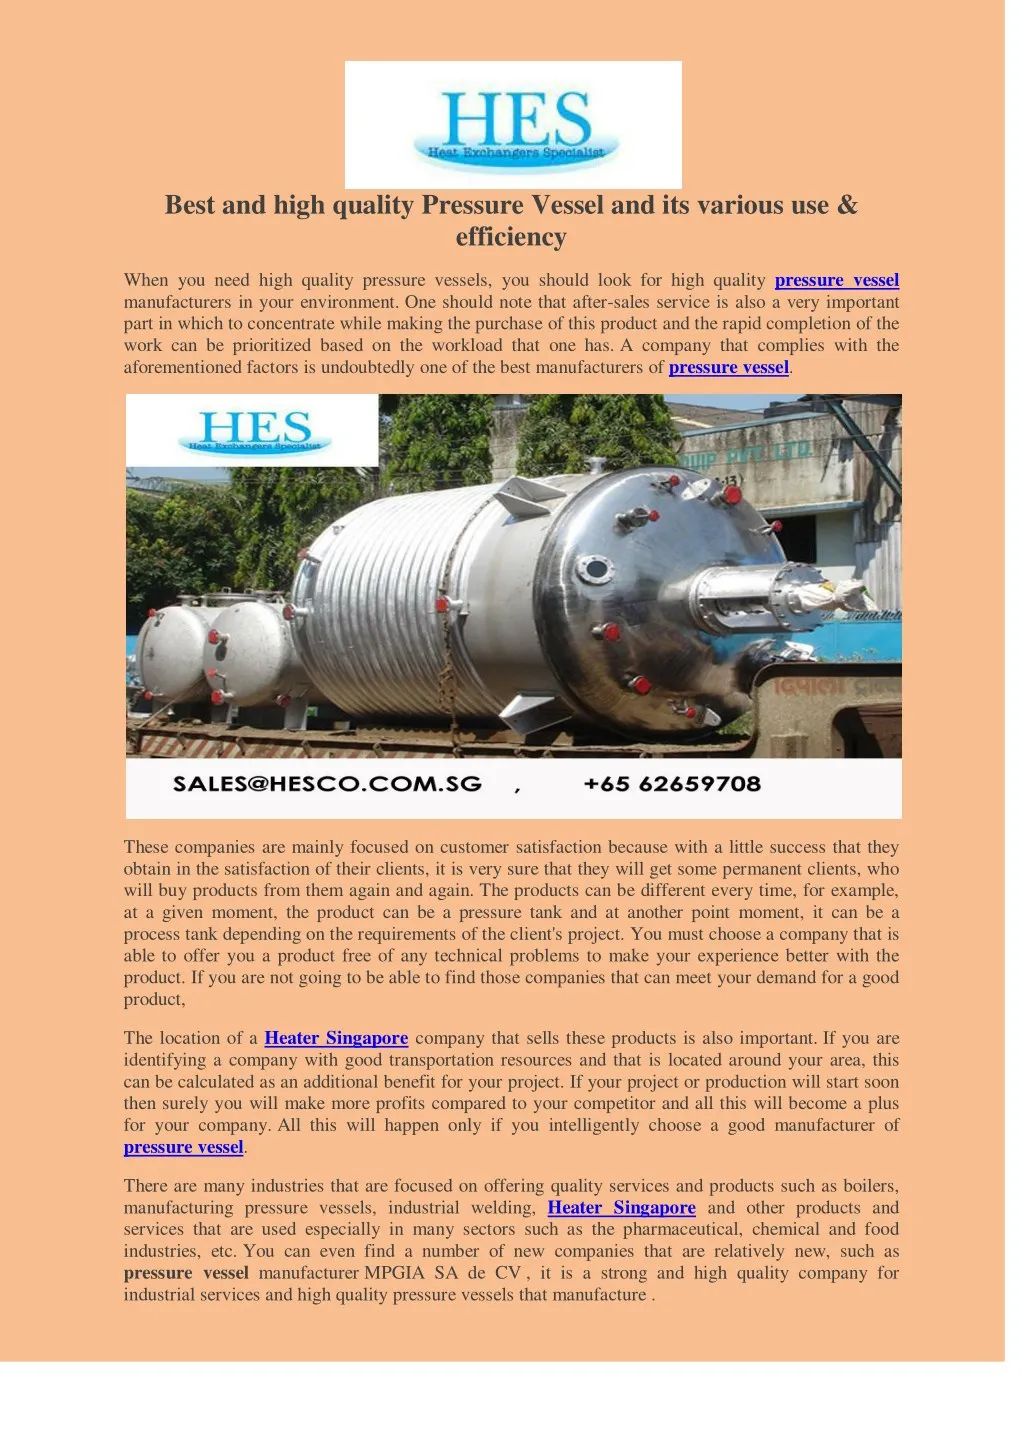 best and high quality pressure vessel